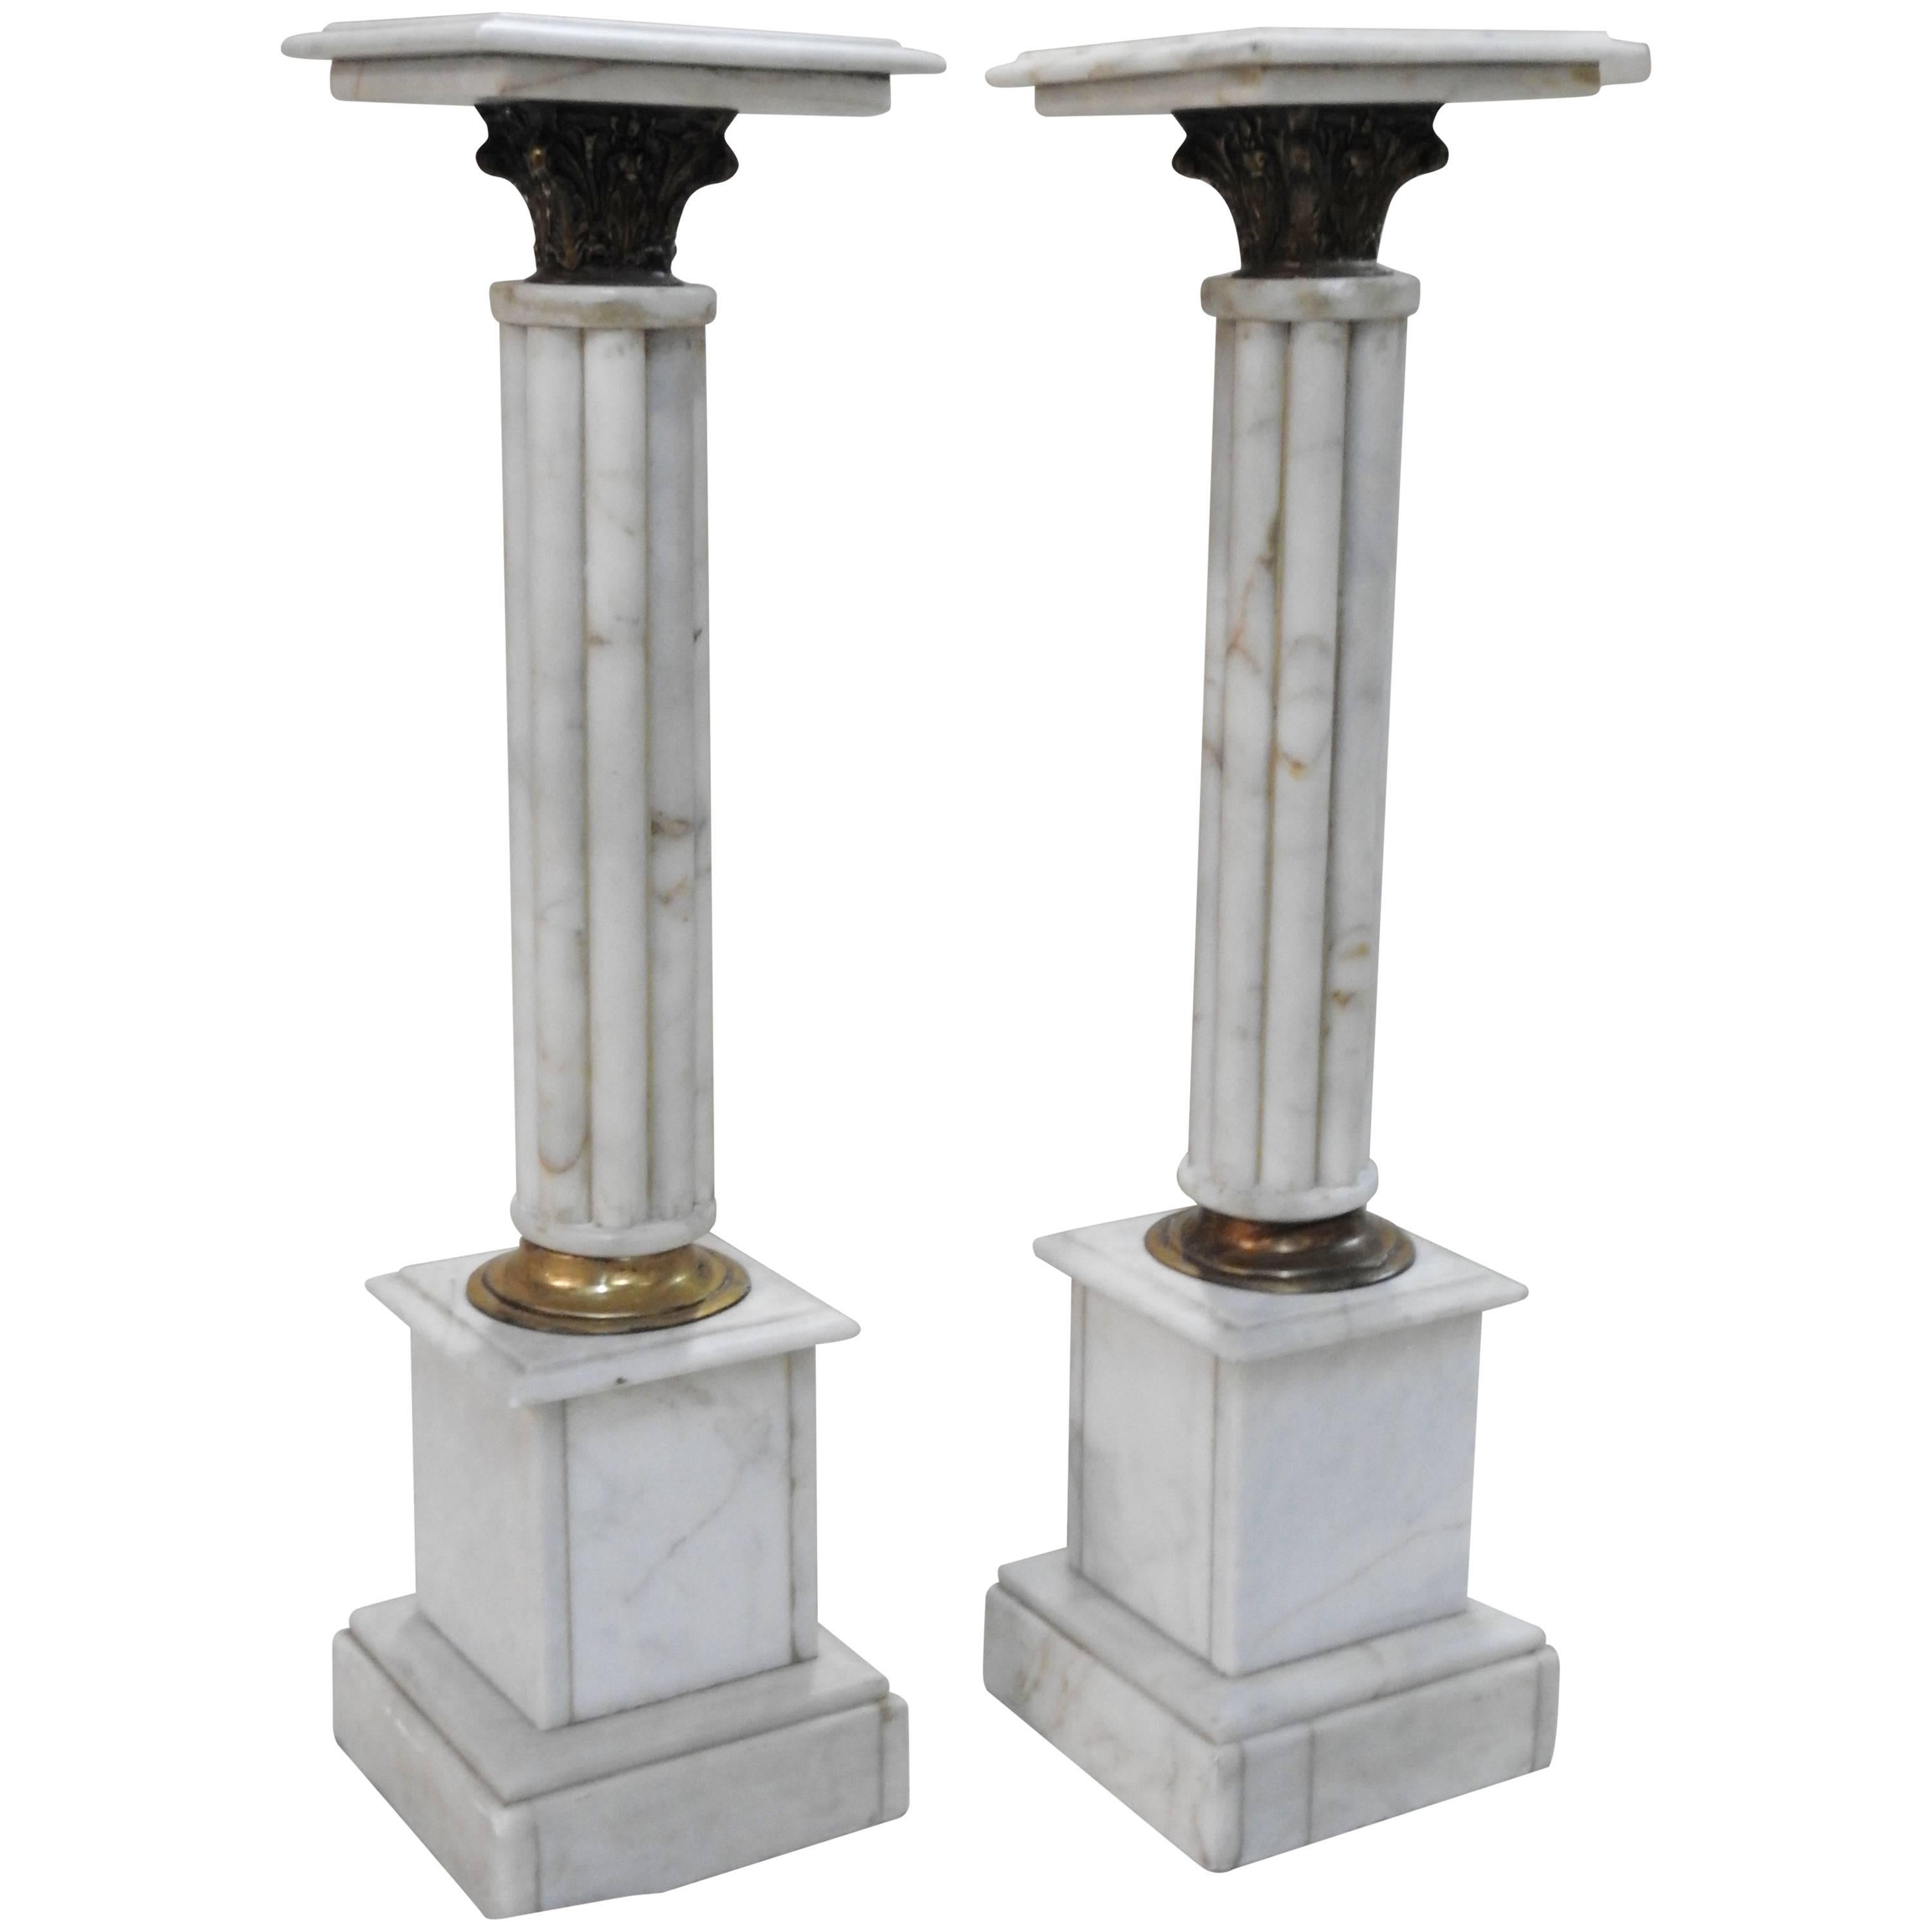 Early 20th Century Pair of Marble Pedestals with Bronze Details